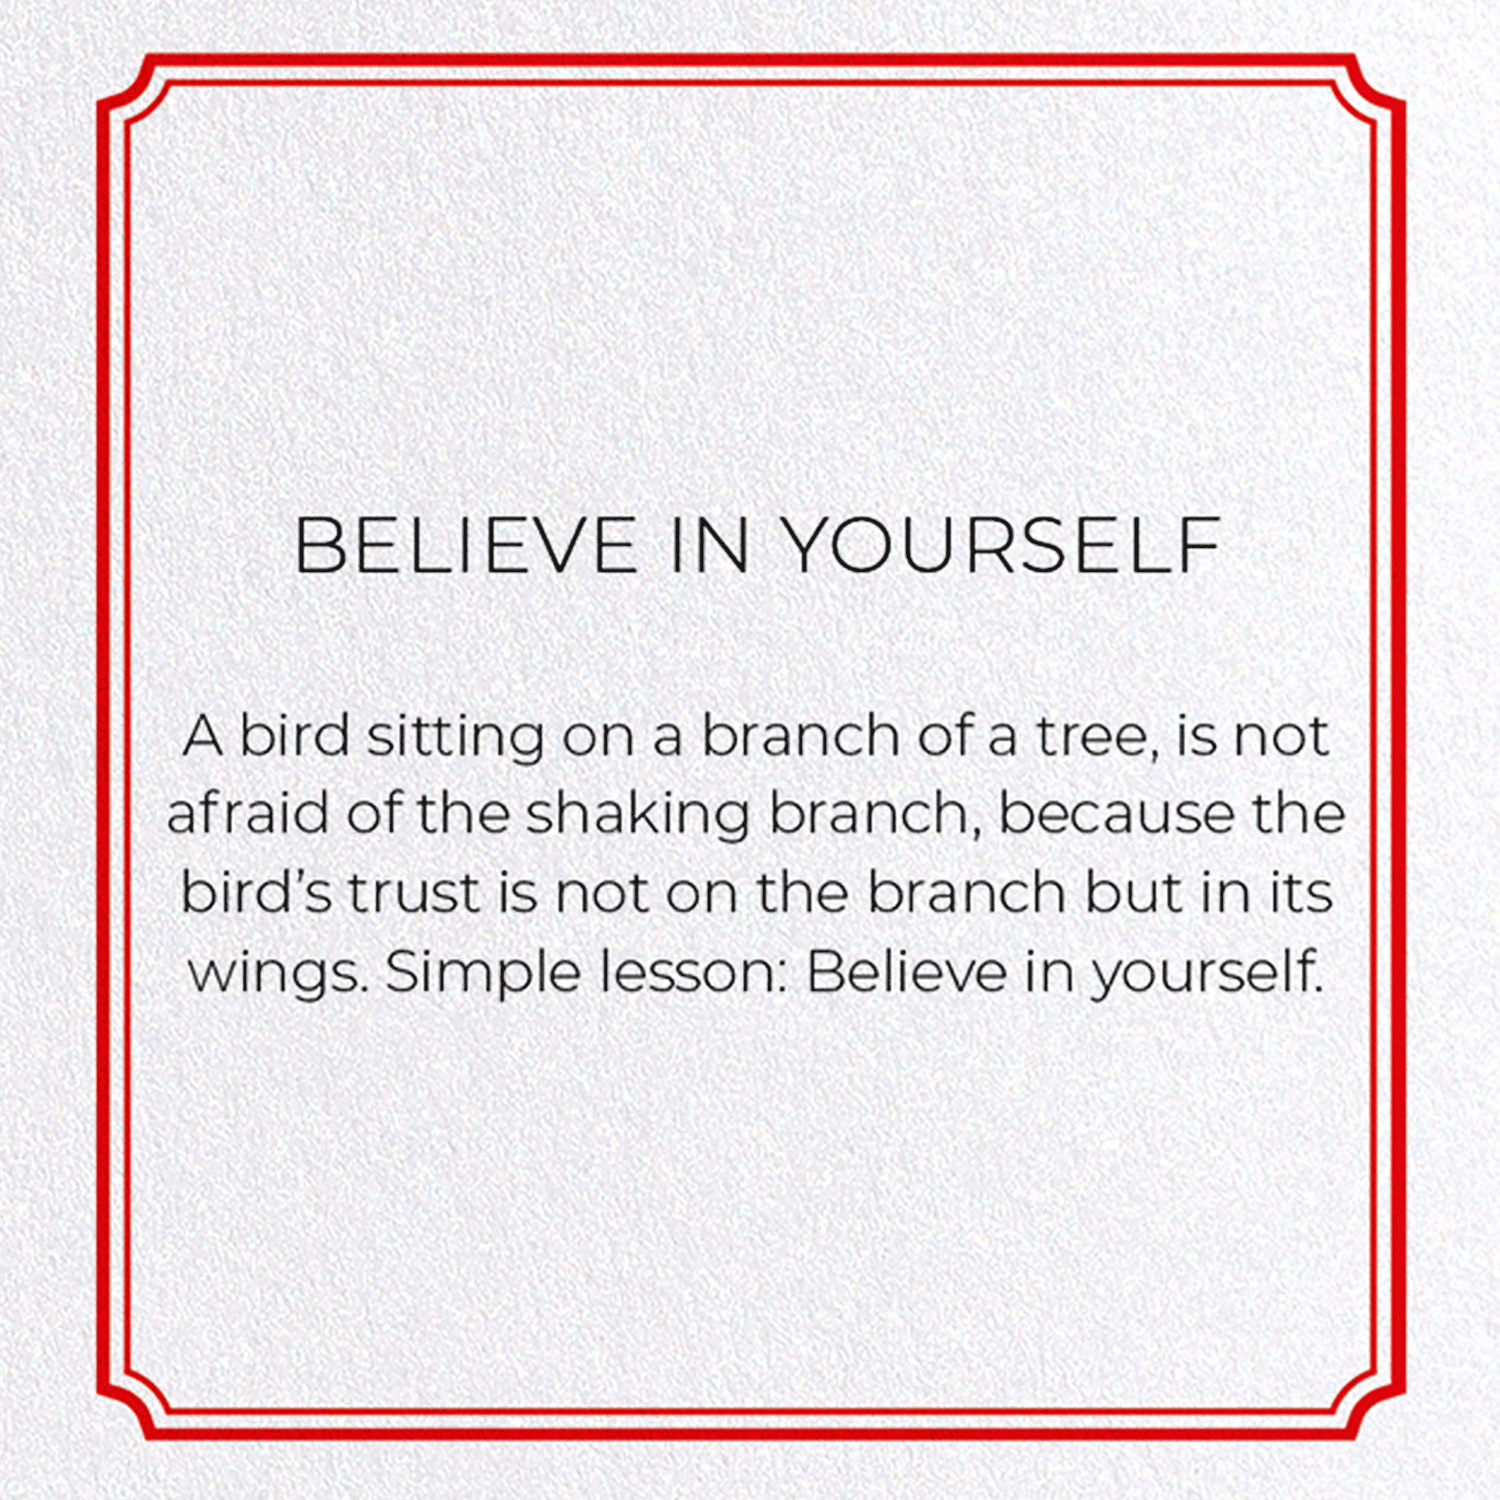 BELIEVE IN YOURSELF: Vintage Greeting Card